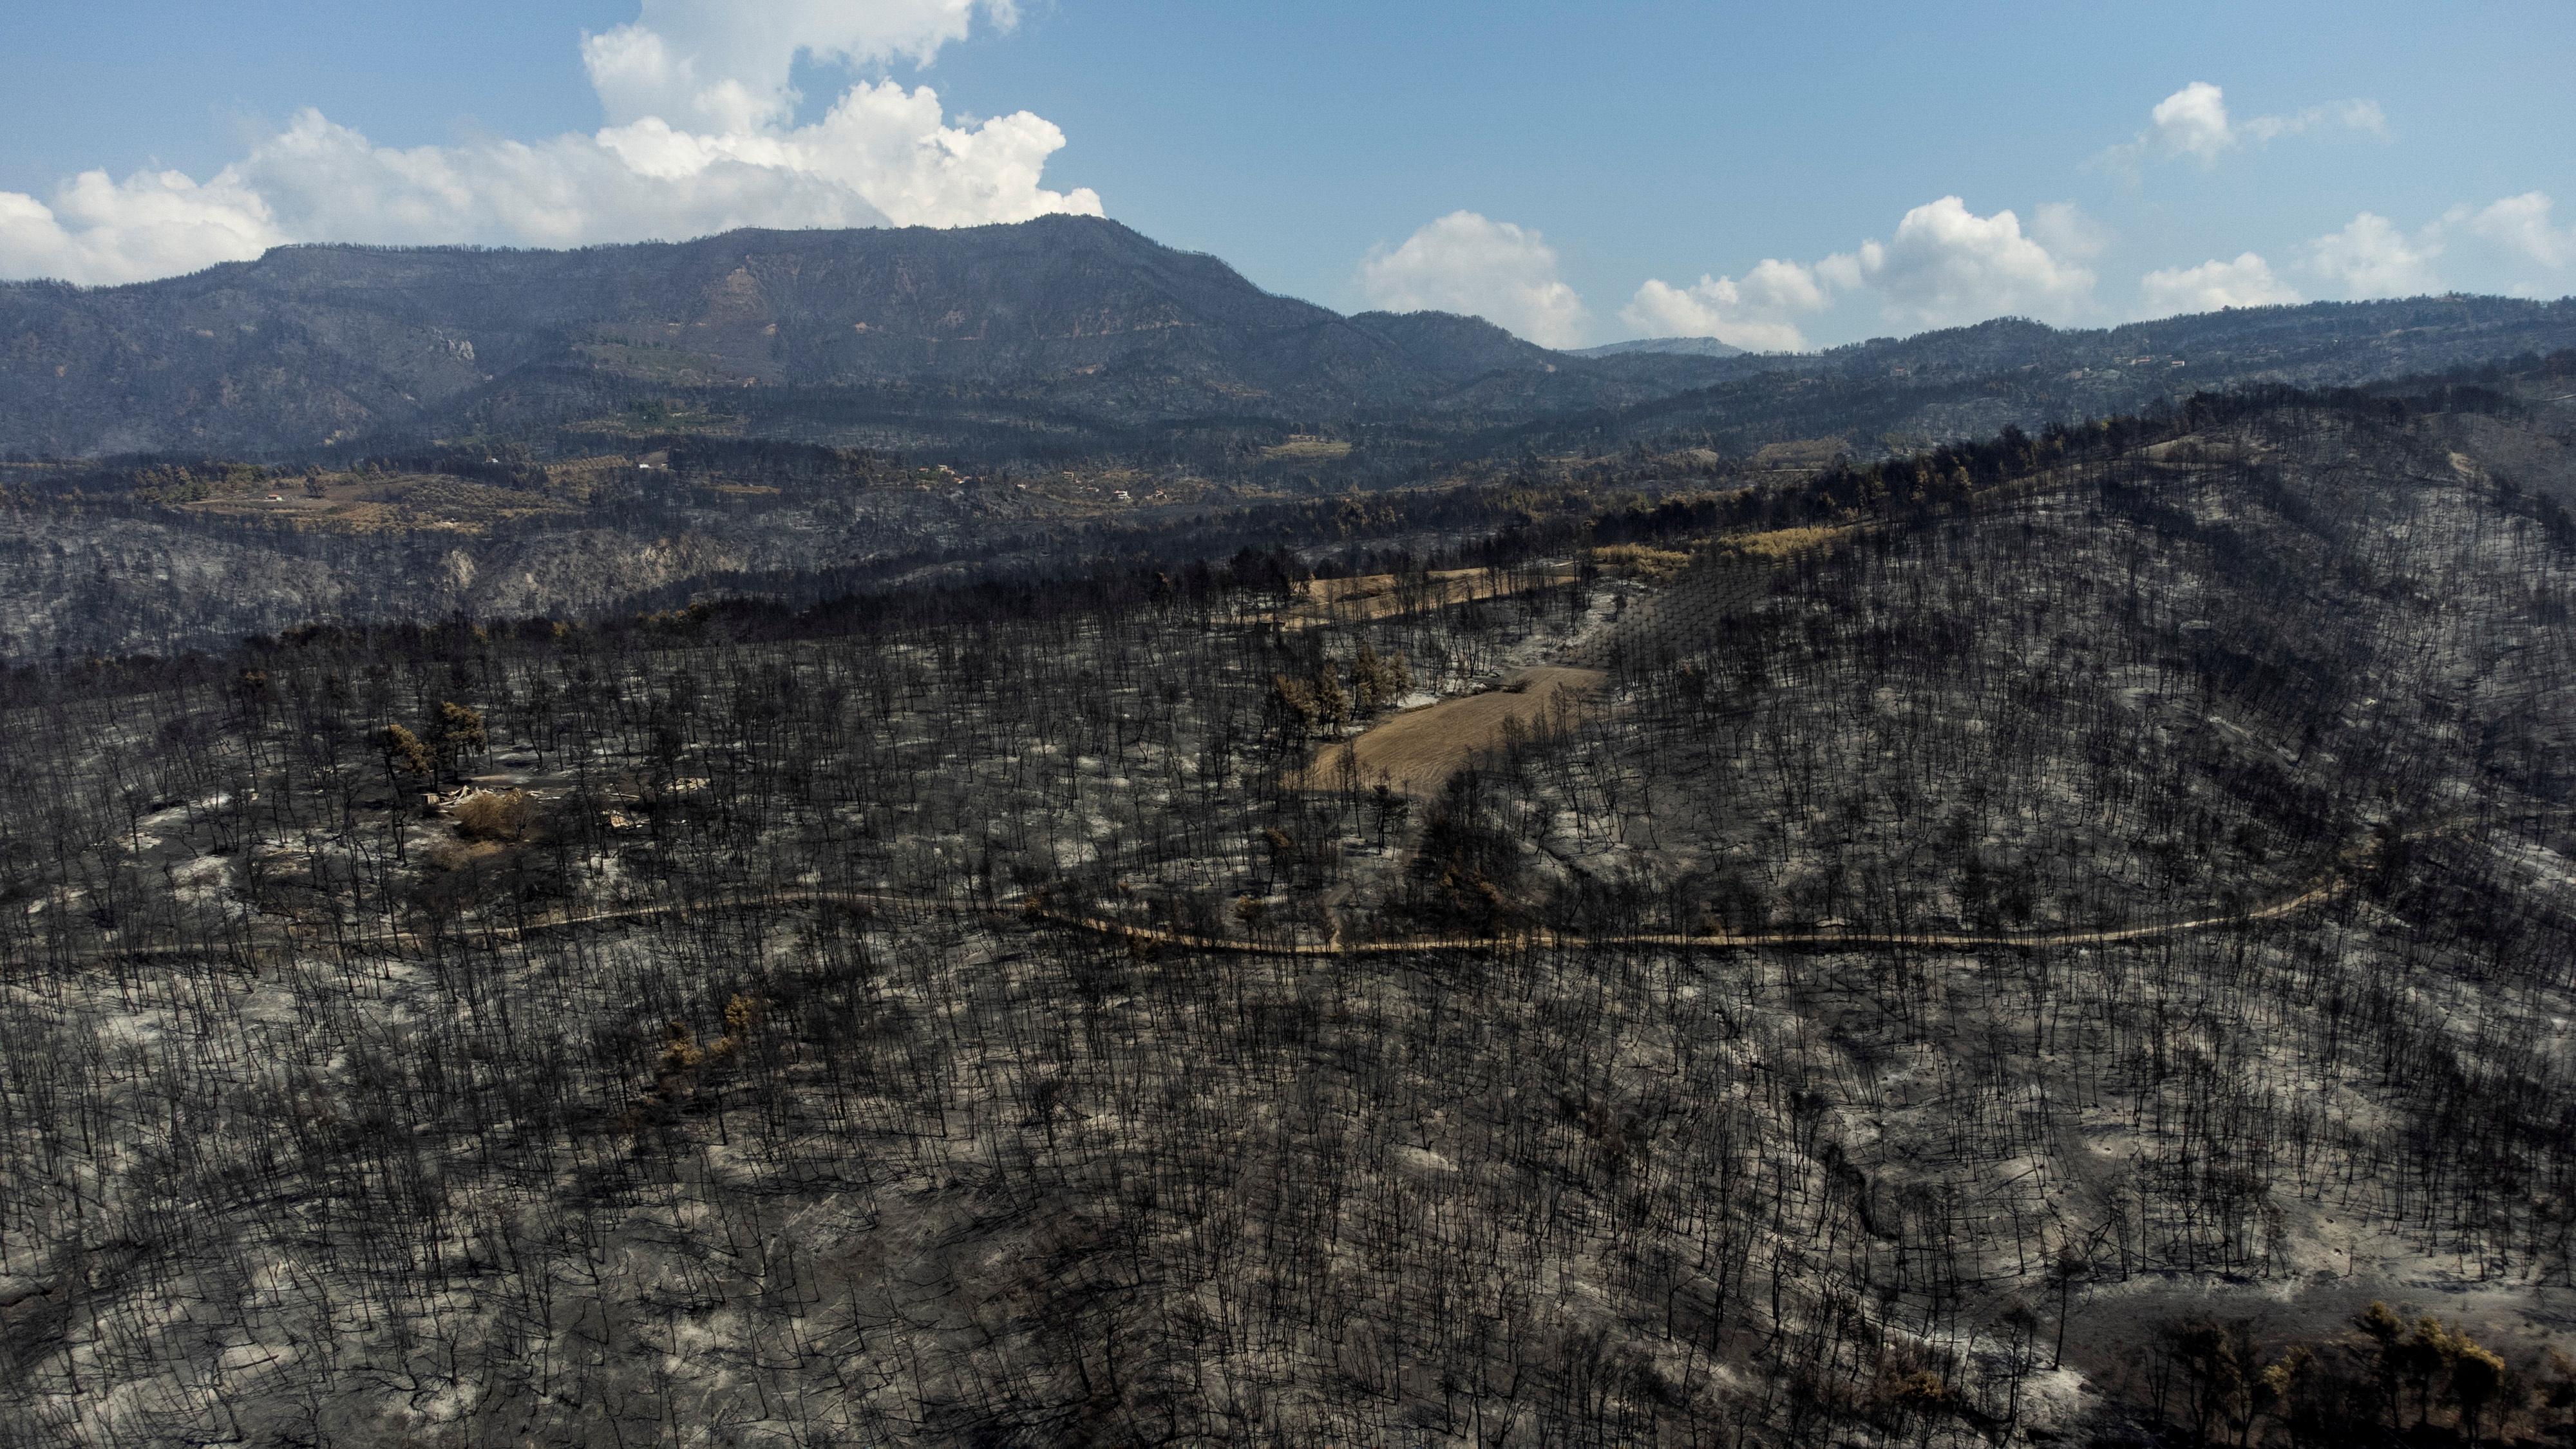 Wildfire on the island of Evia